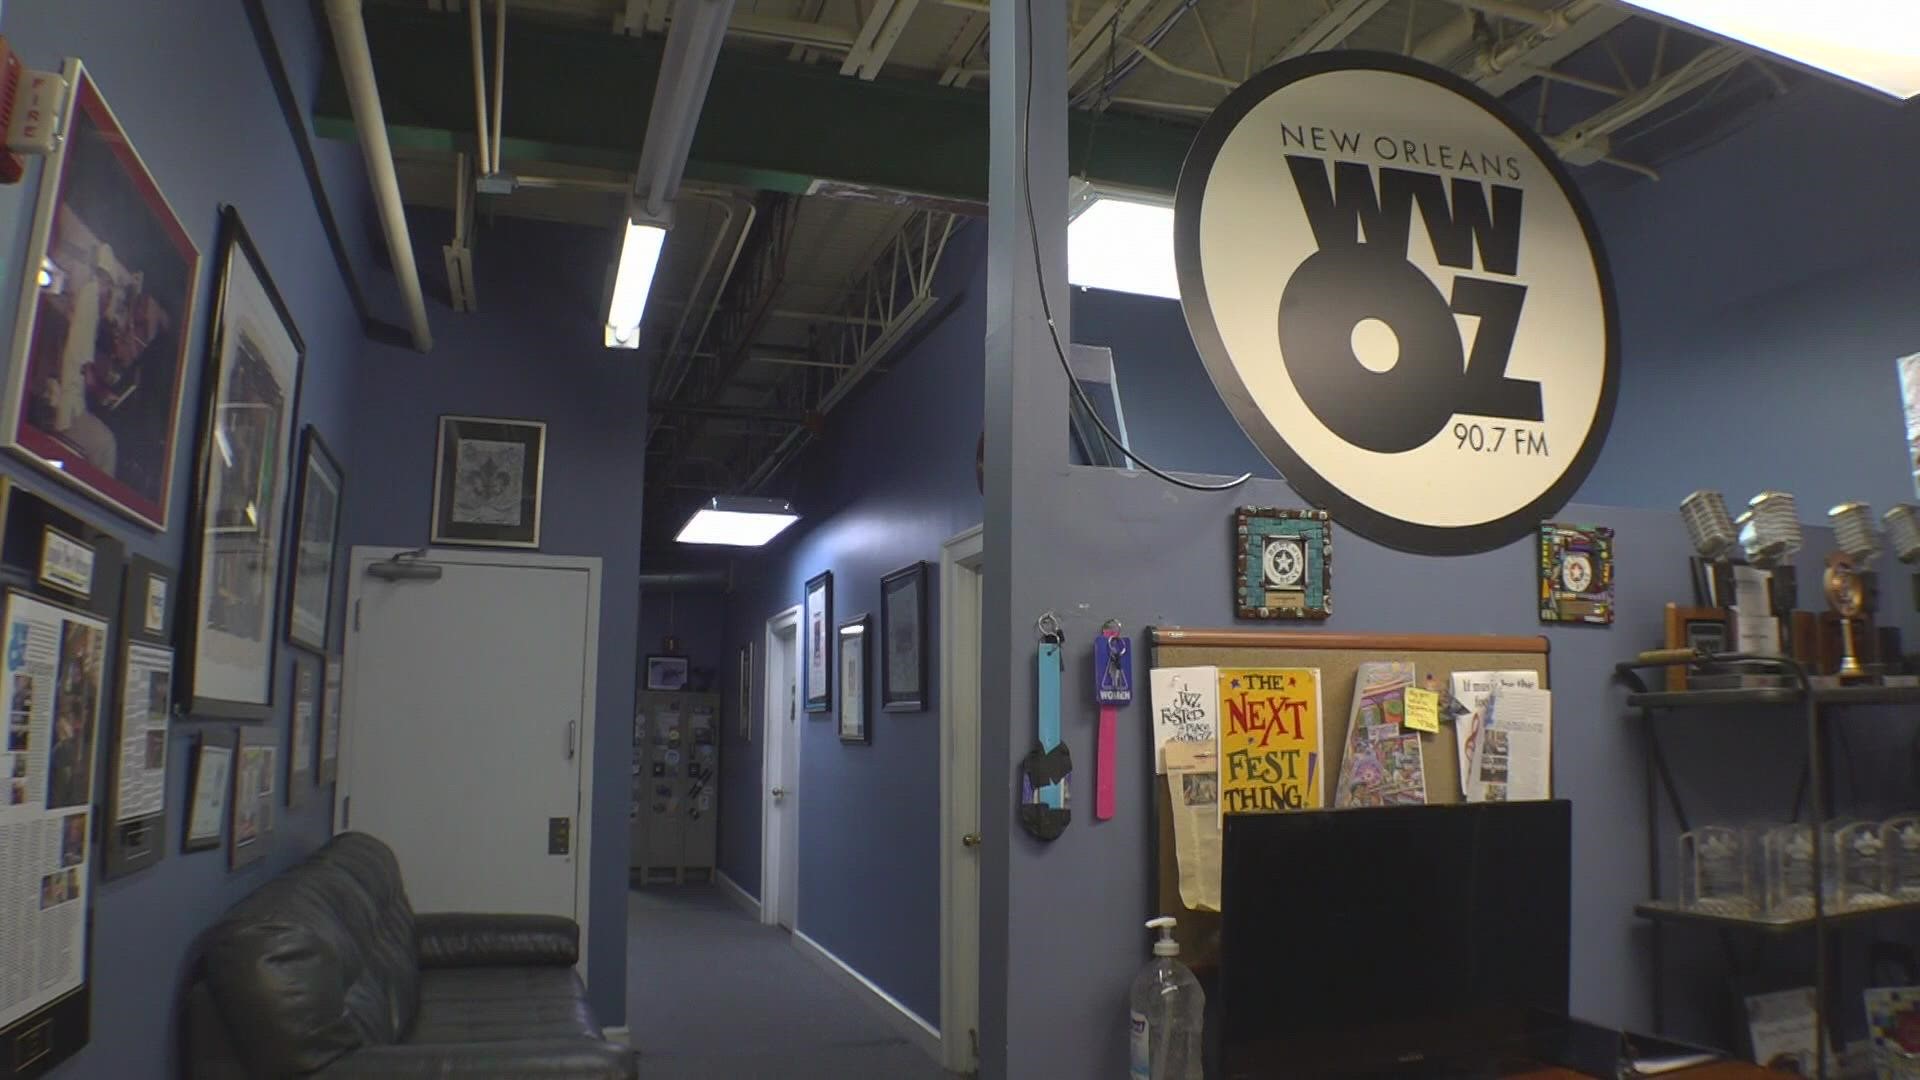 In a time when the city needs it the most, WWOZ offers some music therapy for those that need it after getting through Hurricane Ida.